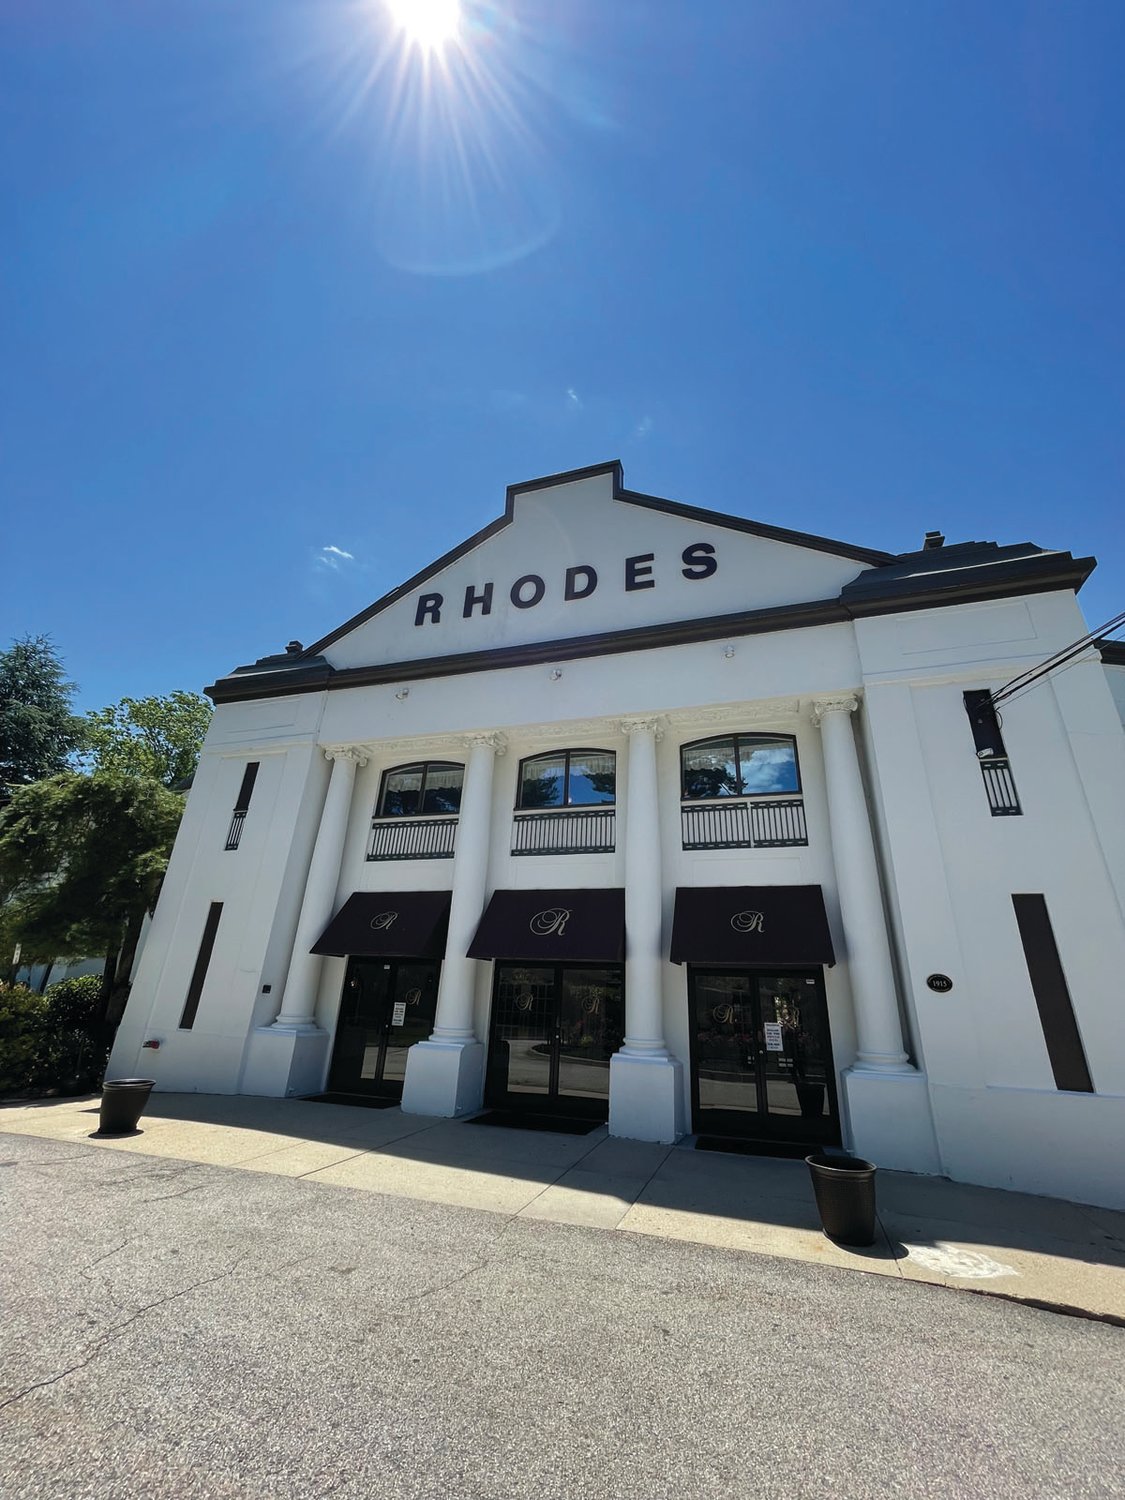 ICONIC LOCATION: Rhodes on the Pawtuxet’s current Ballroom opened nearly 106 years ago, in August 2015. In the decades since, it has played host to untold gatherings, from weddings to sporting events.